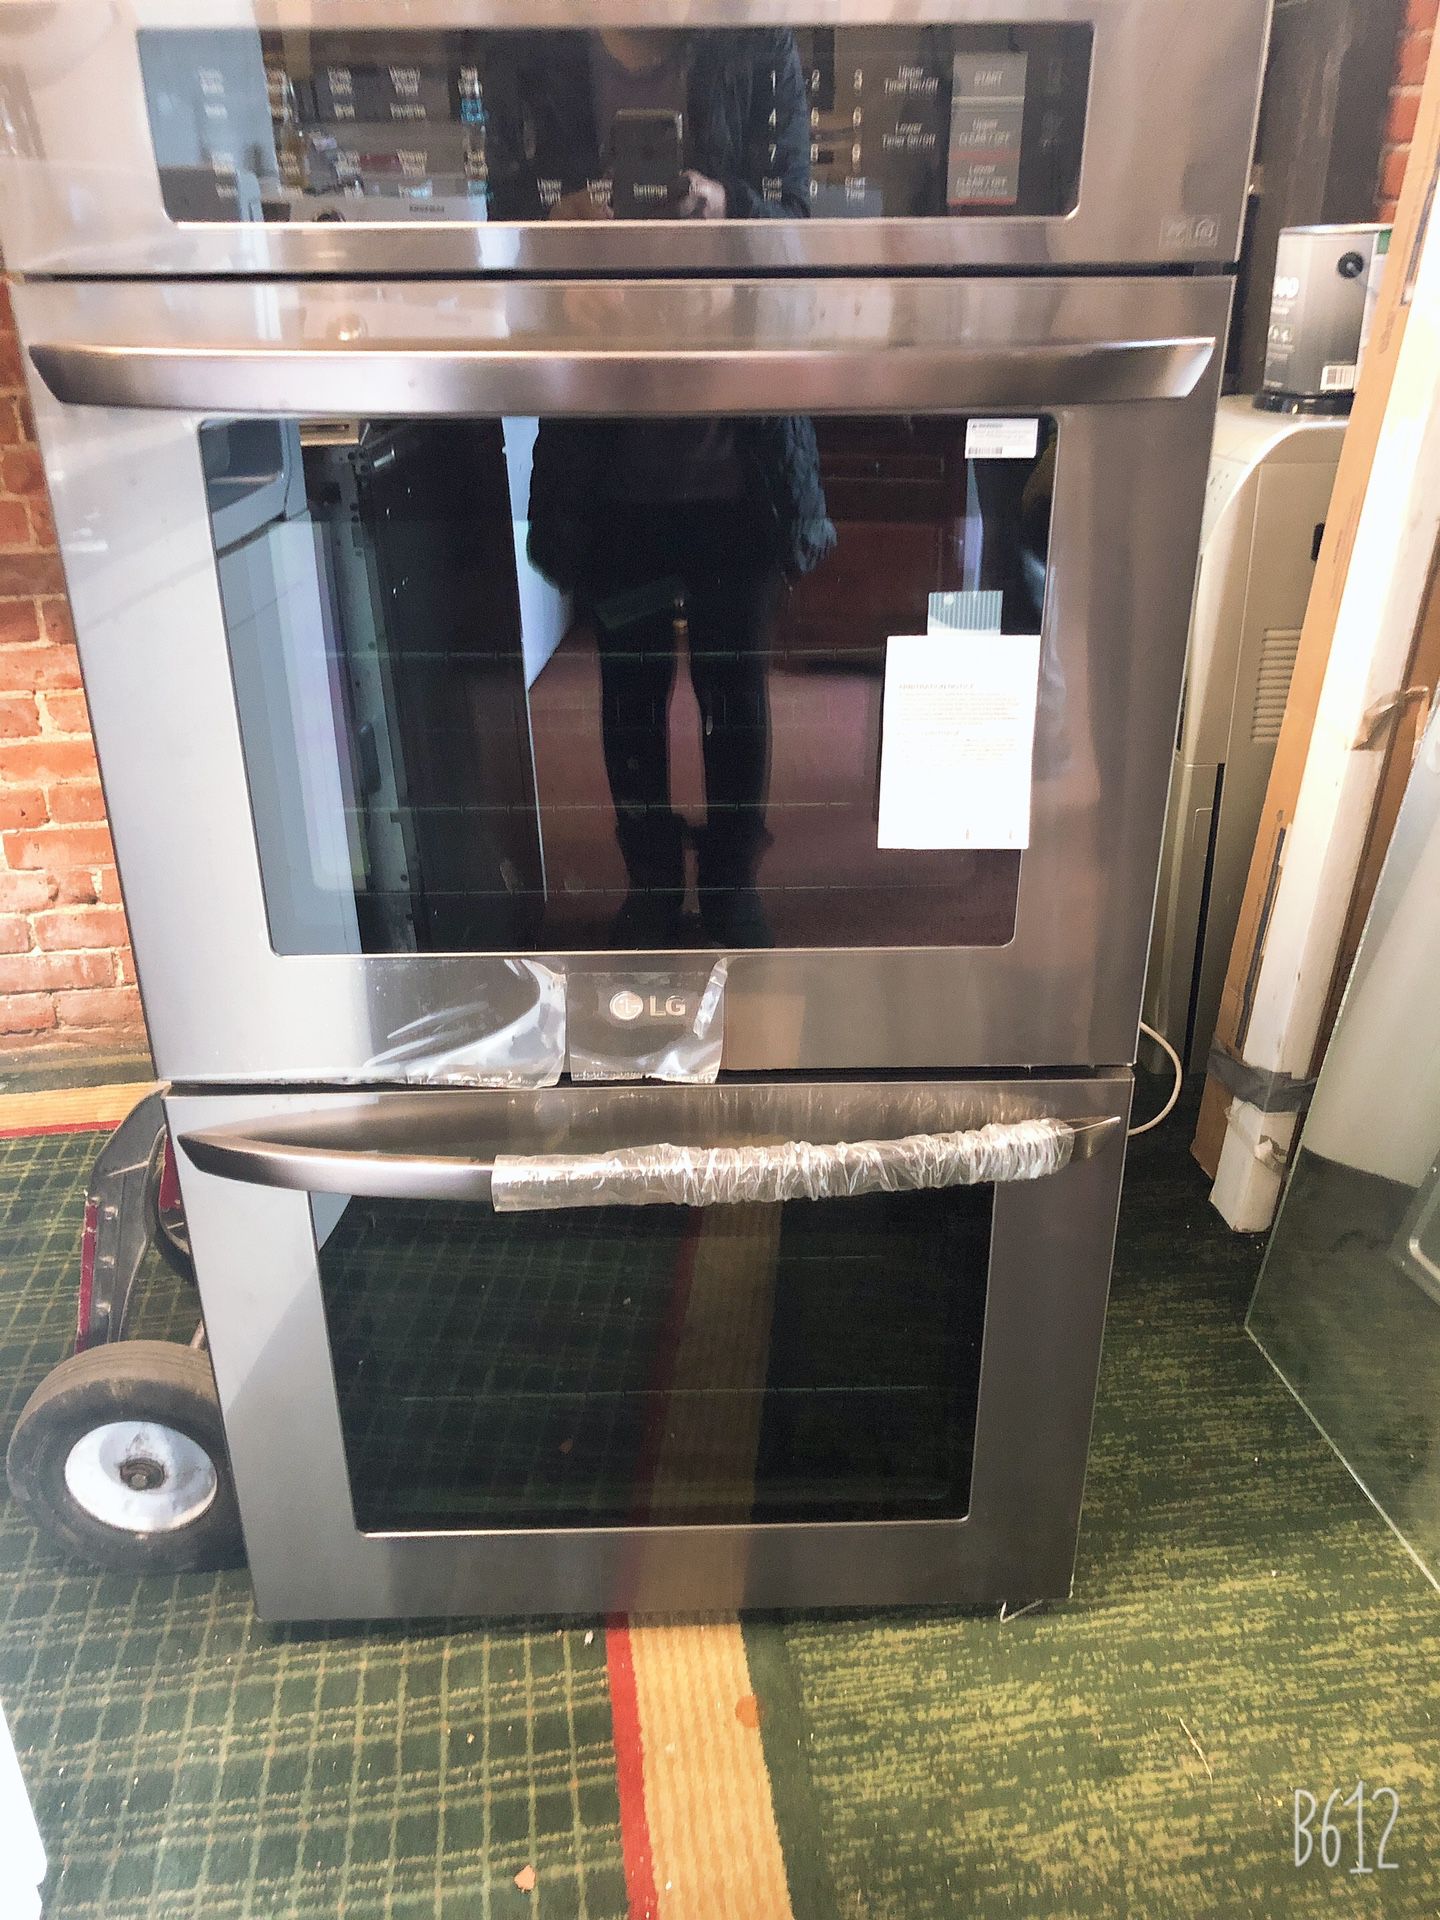 LG double oven BRAND NEW